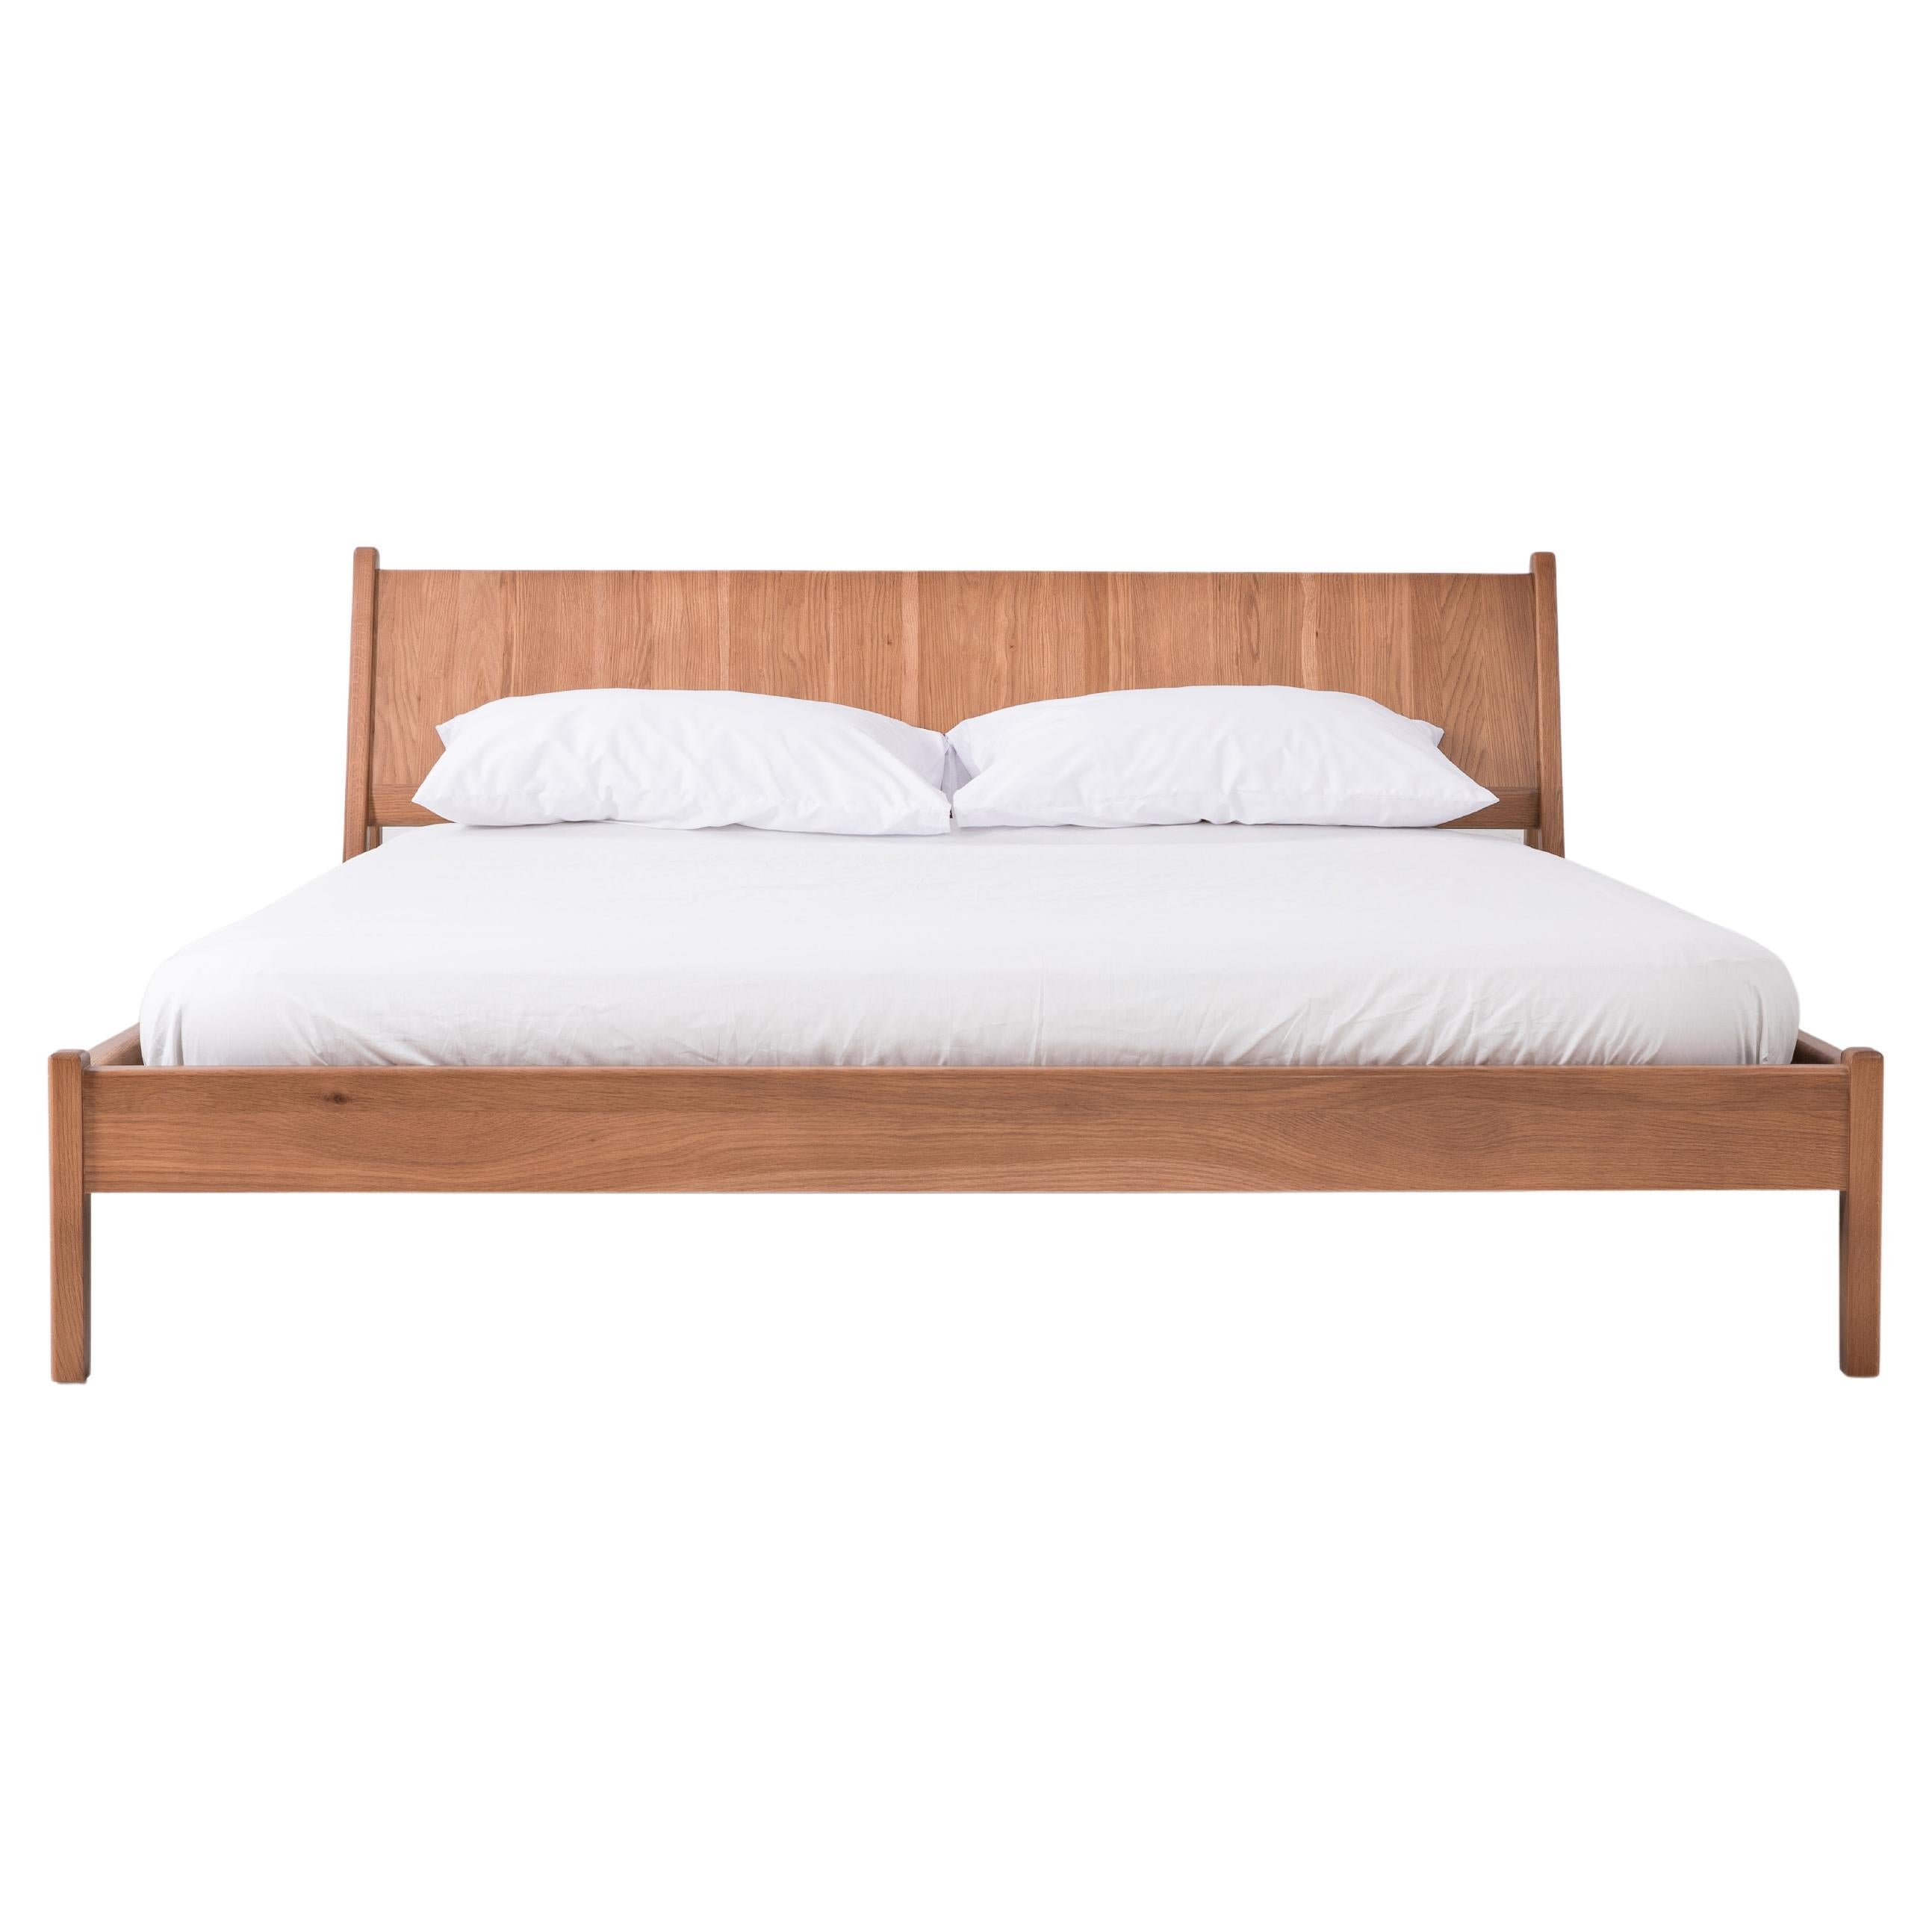 Plume King Bed in Sienna by Sun at Six, Minimalist Wood Bed For Sale